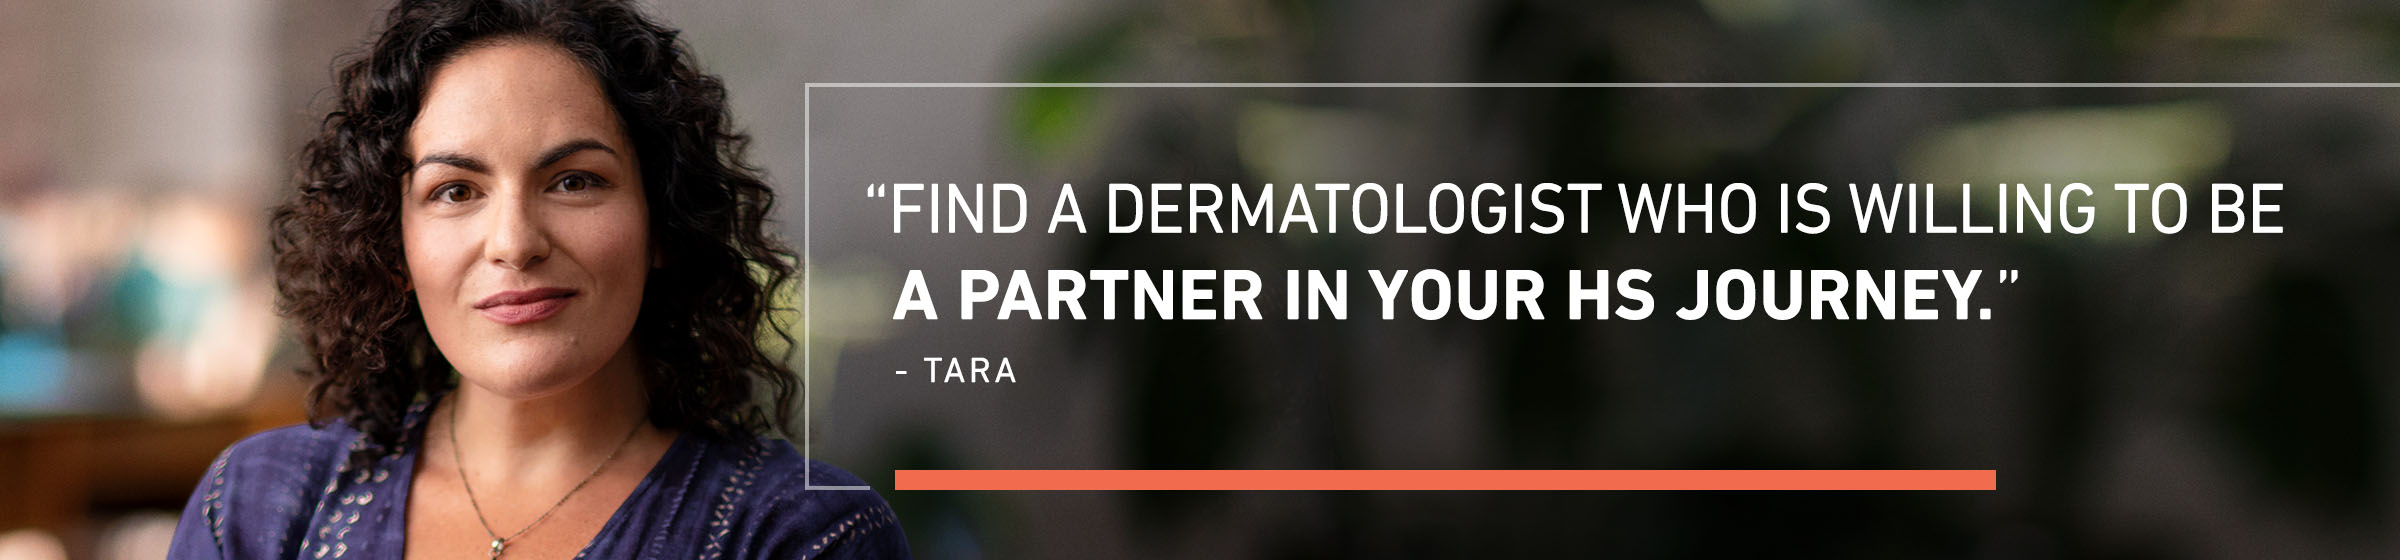 Find a dermatologist who is willing to be a partner in your HS journey.